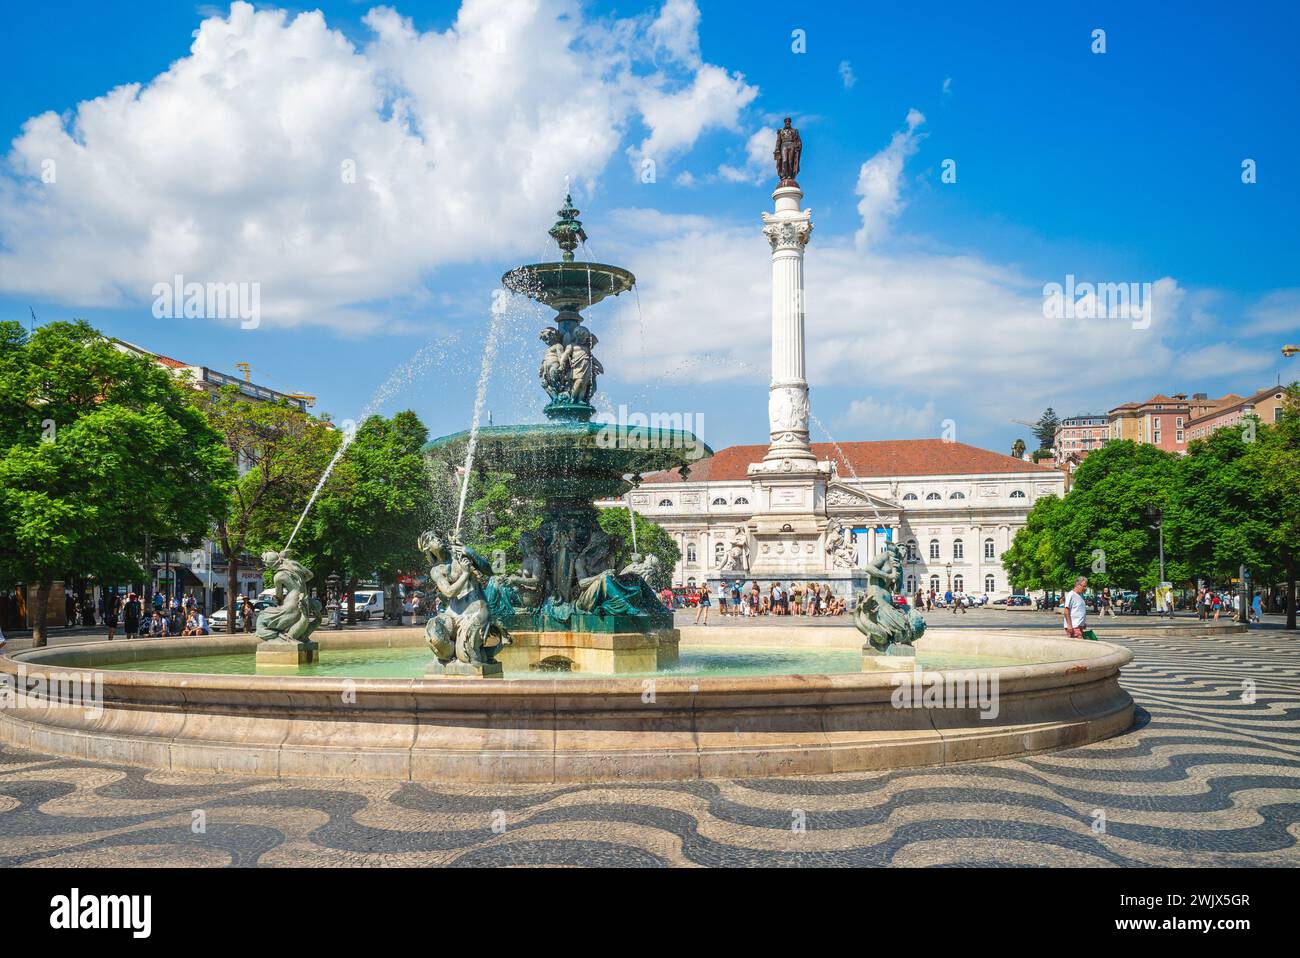 September 18, 2018, Rossio Square, aka King Pedro IV Square, in Lisbon, Portugal has been a meeting place for people of Lisbon for centuries. There ar Stock Photo